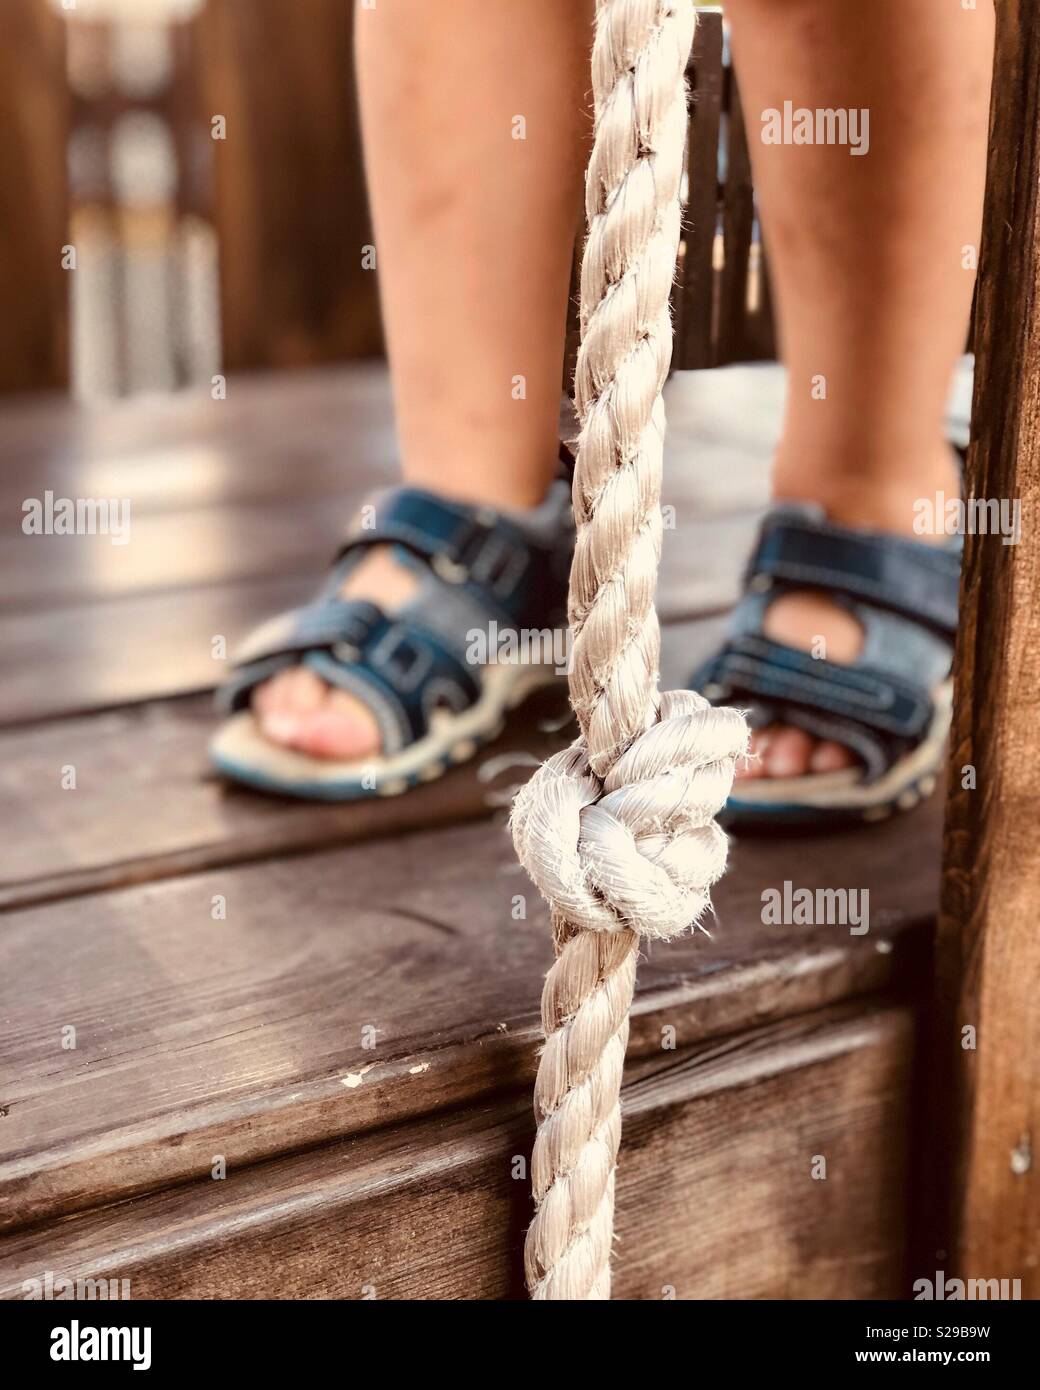 Toddler’feet in blue sandals on a wooden deck with a white rope Stock Photo